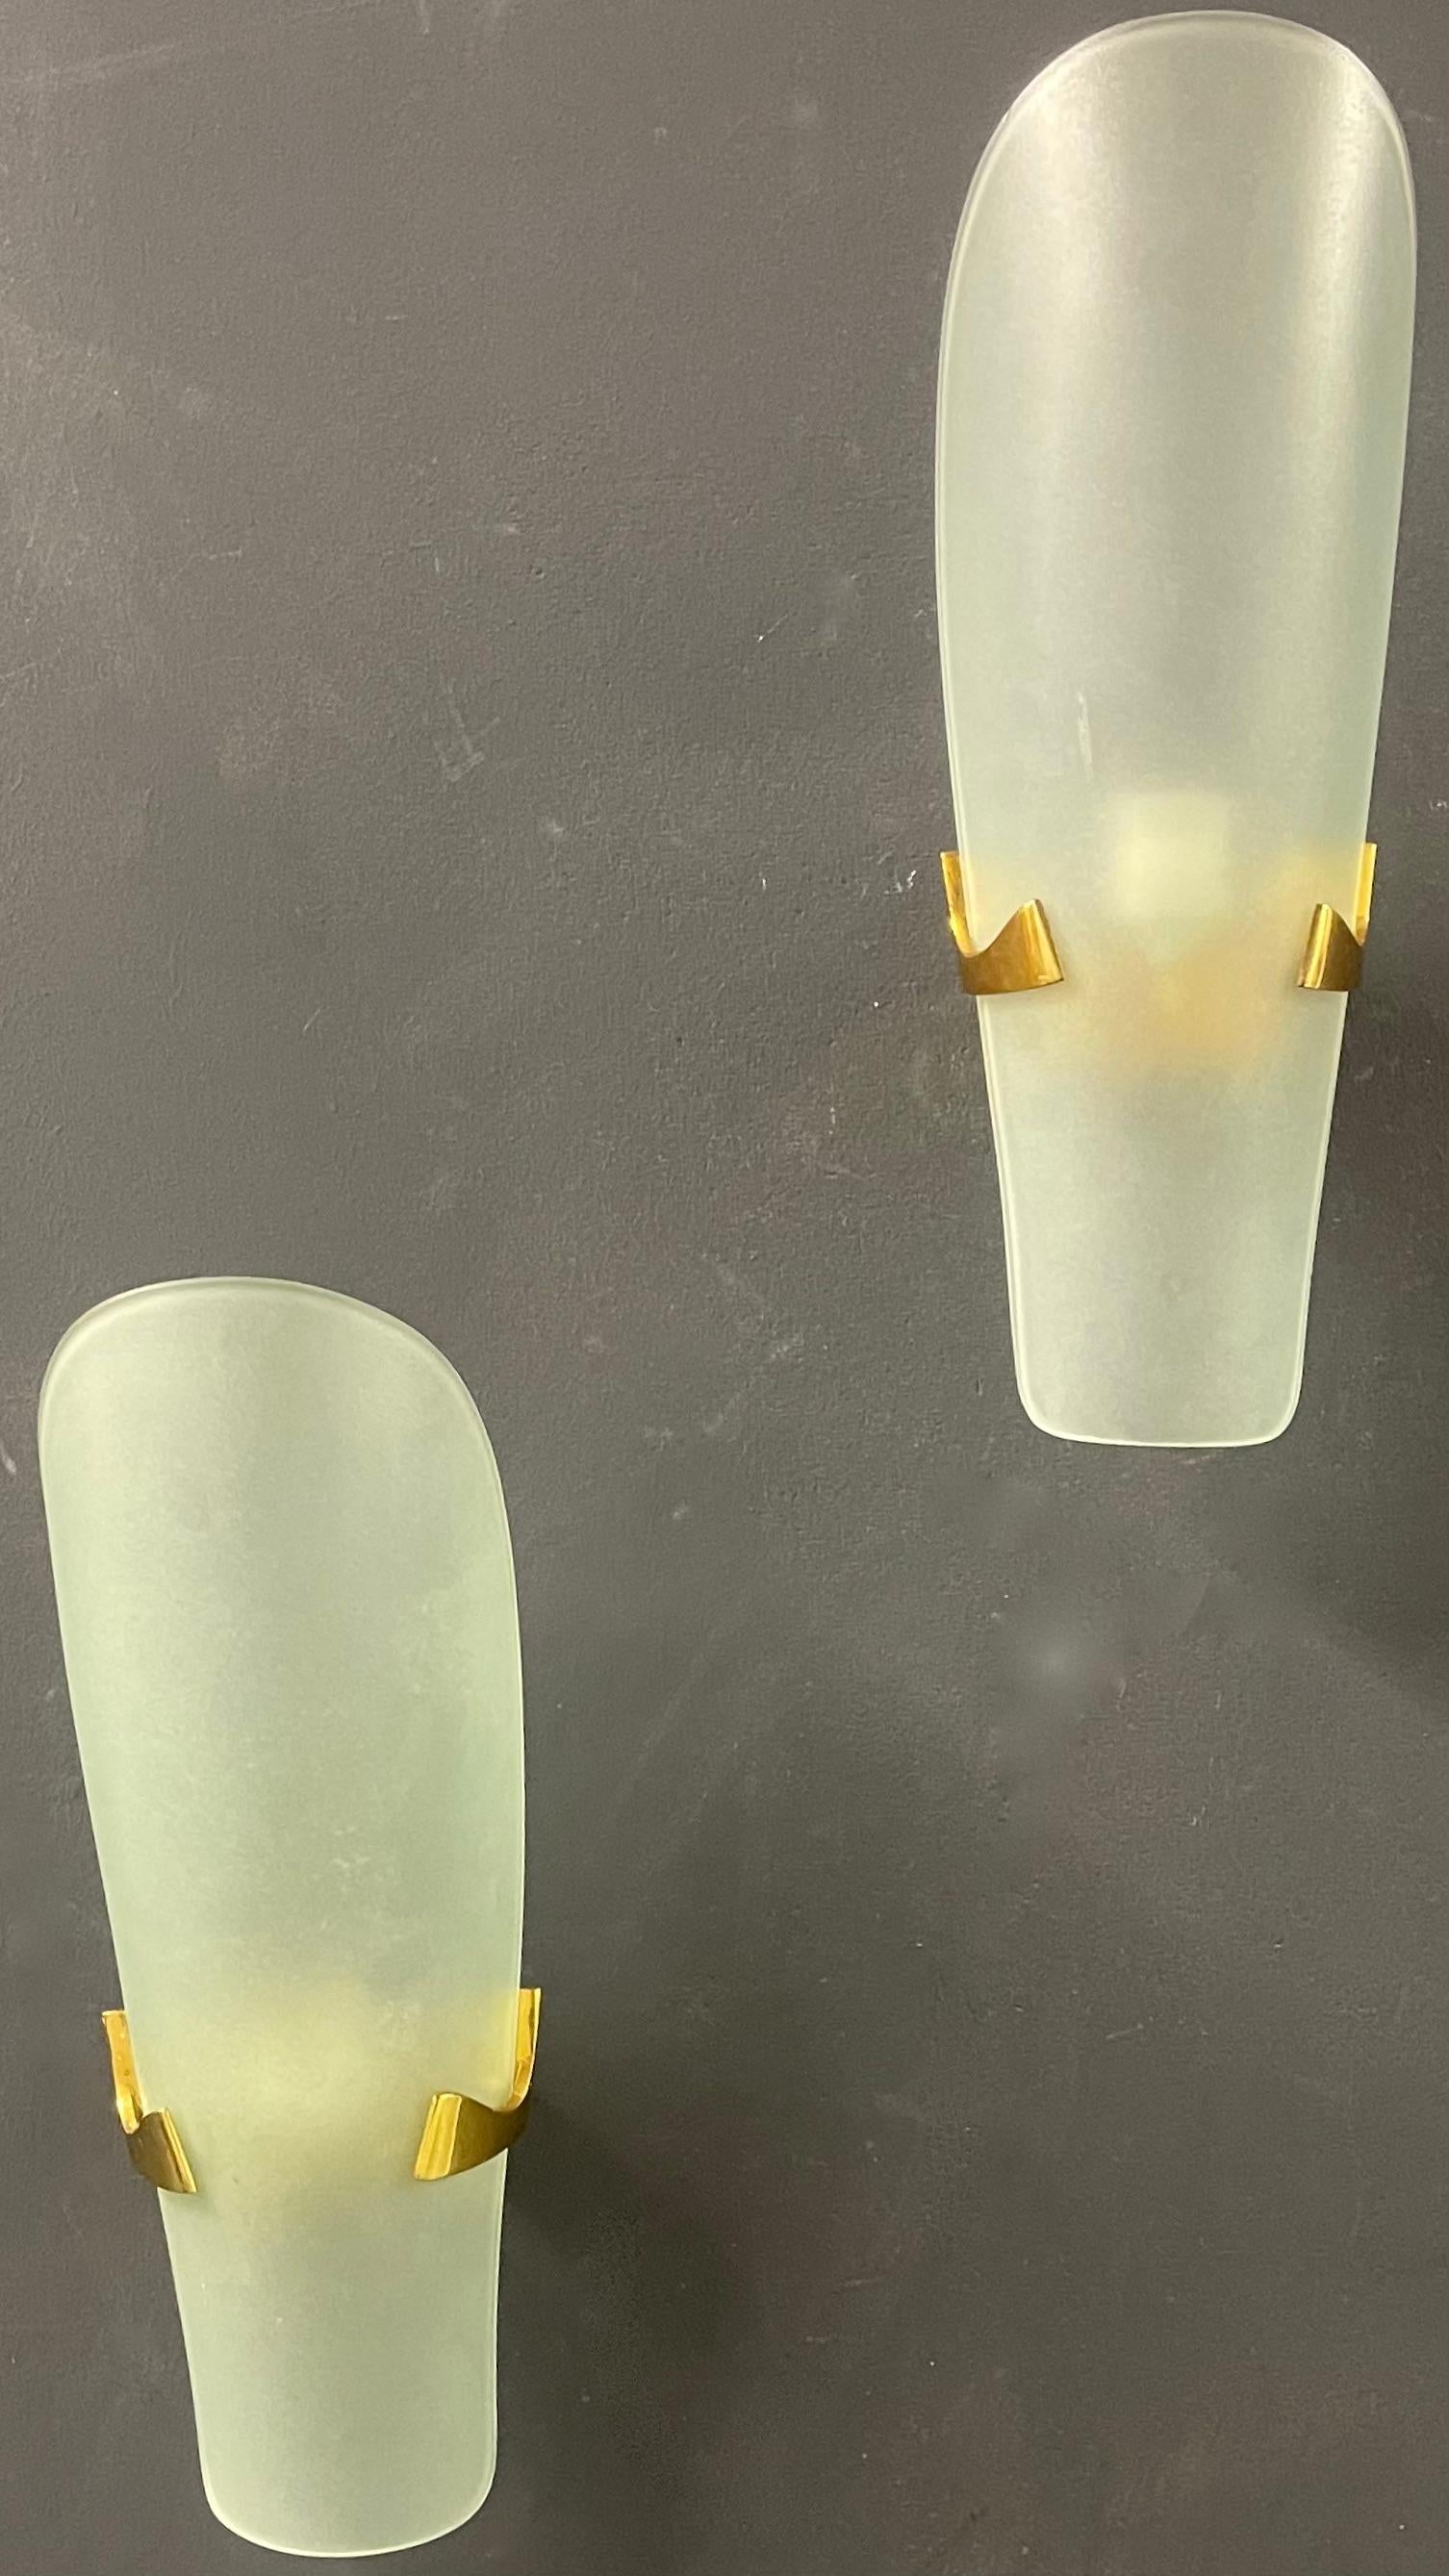 rare and elegant pair of max ingrand for fontana arte no. 1636  wall sconces. brass fixture with acid-atched glass. iconic design....
worldwide free shipping.